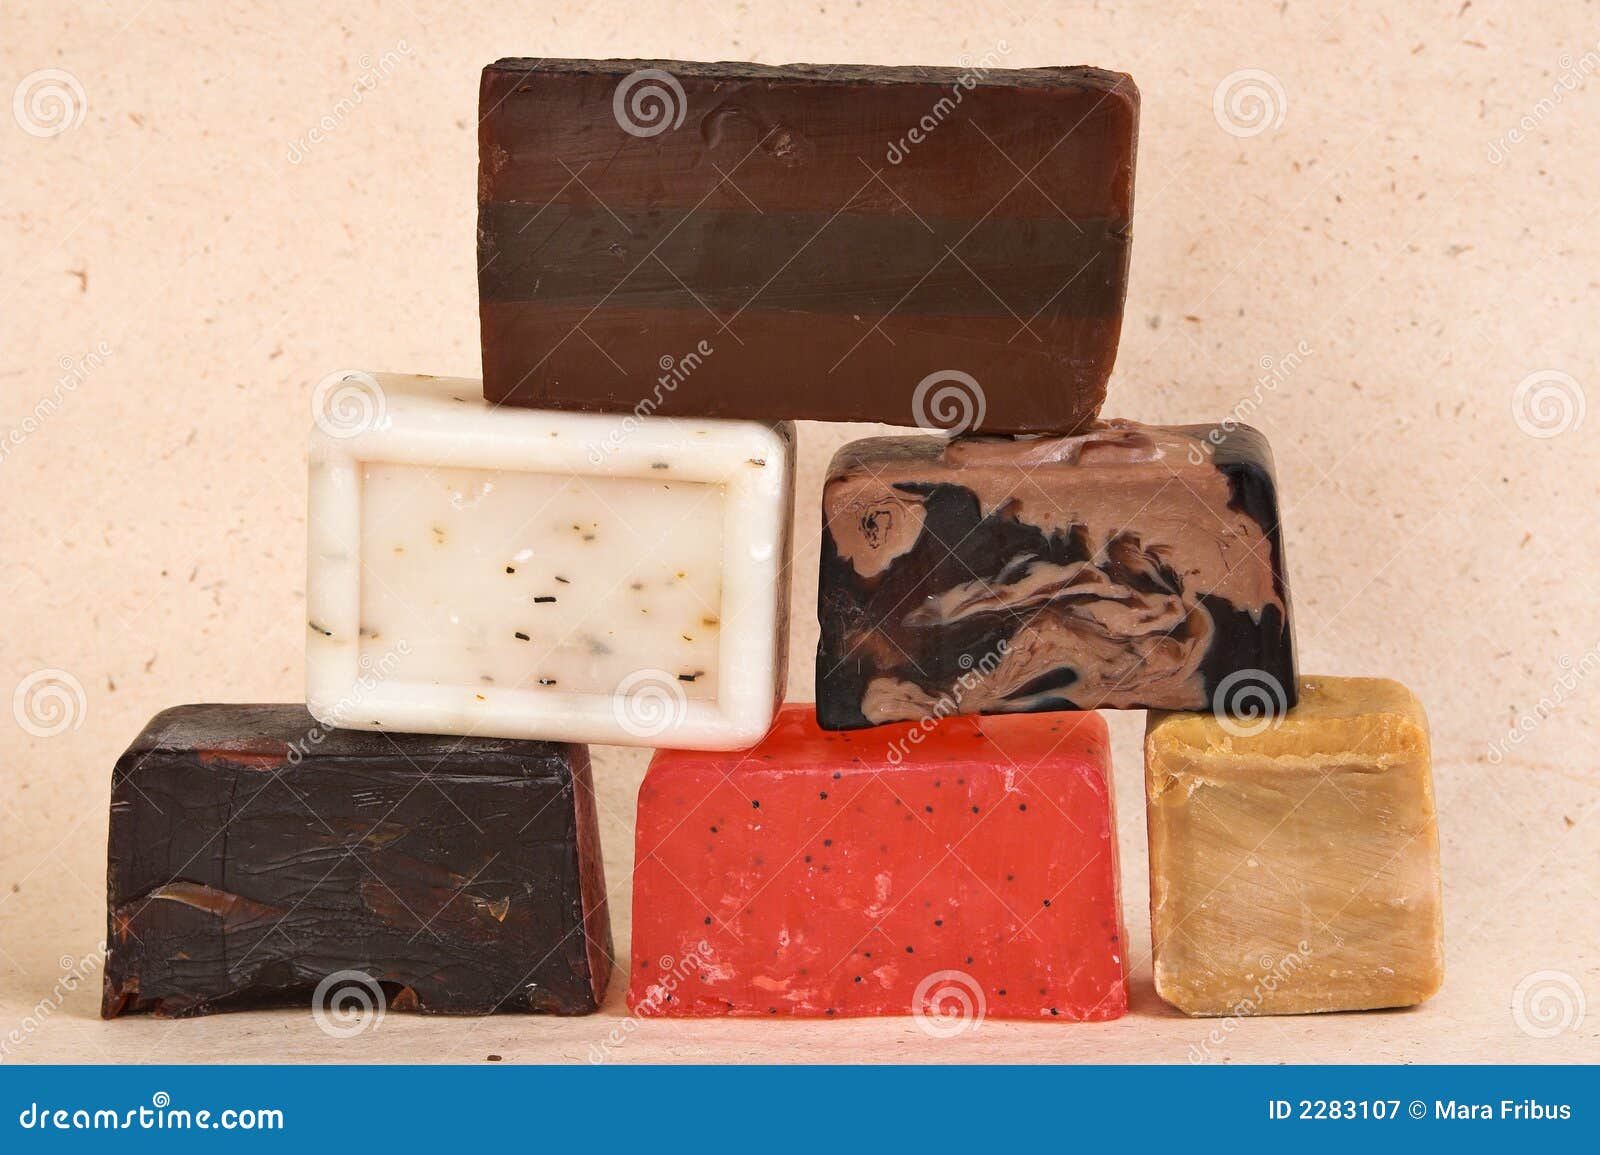 Bars of handmade soap. Bars of different colored handmade soap with herbs.